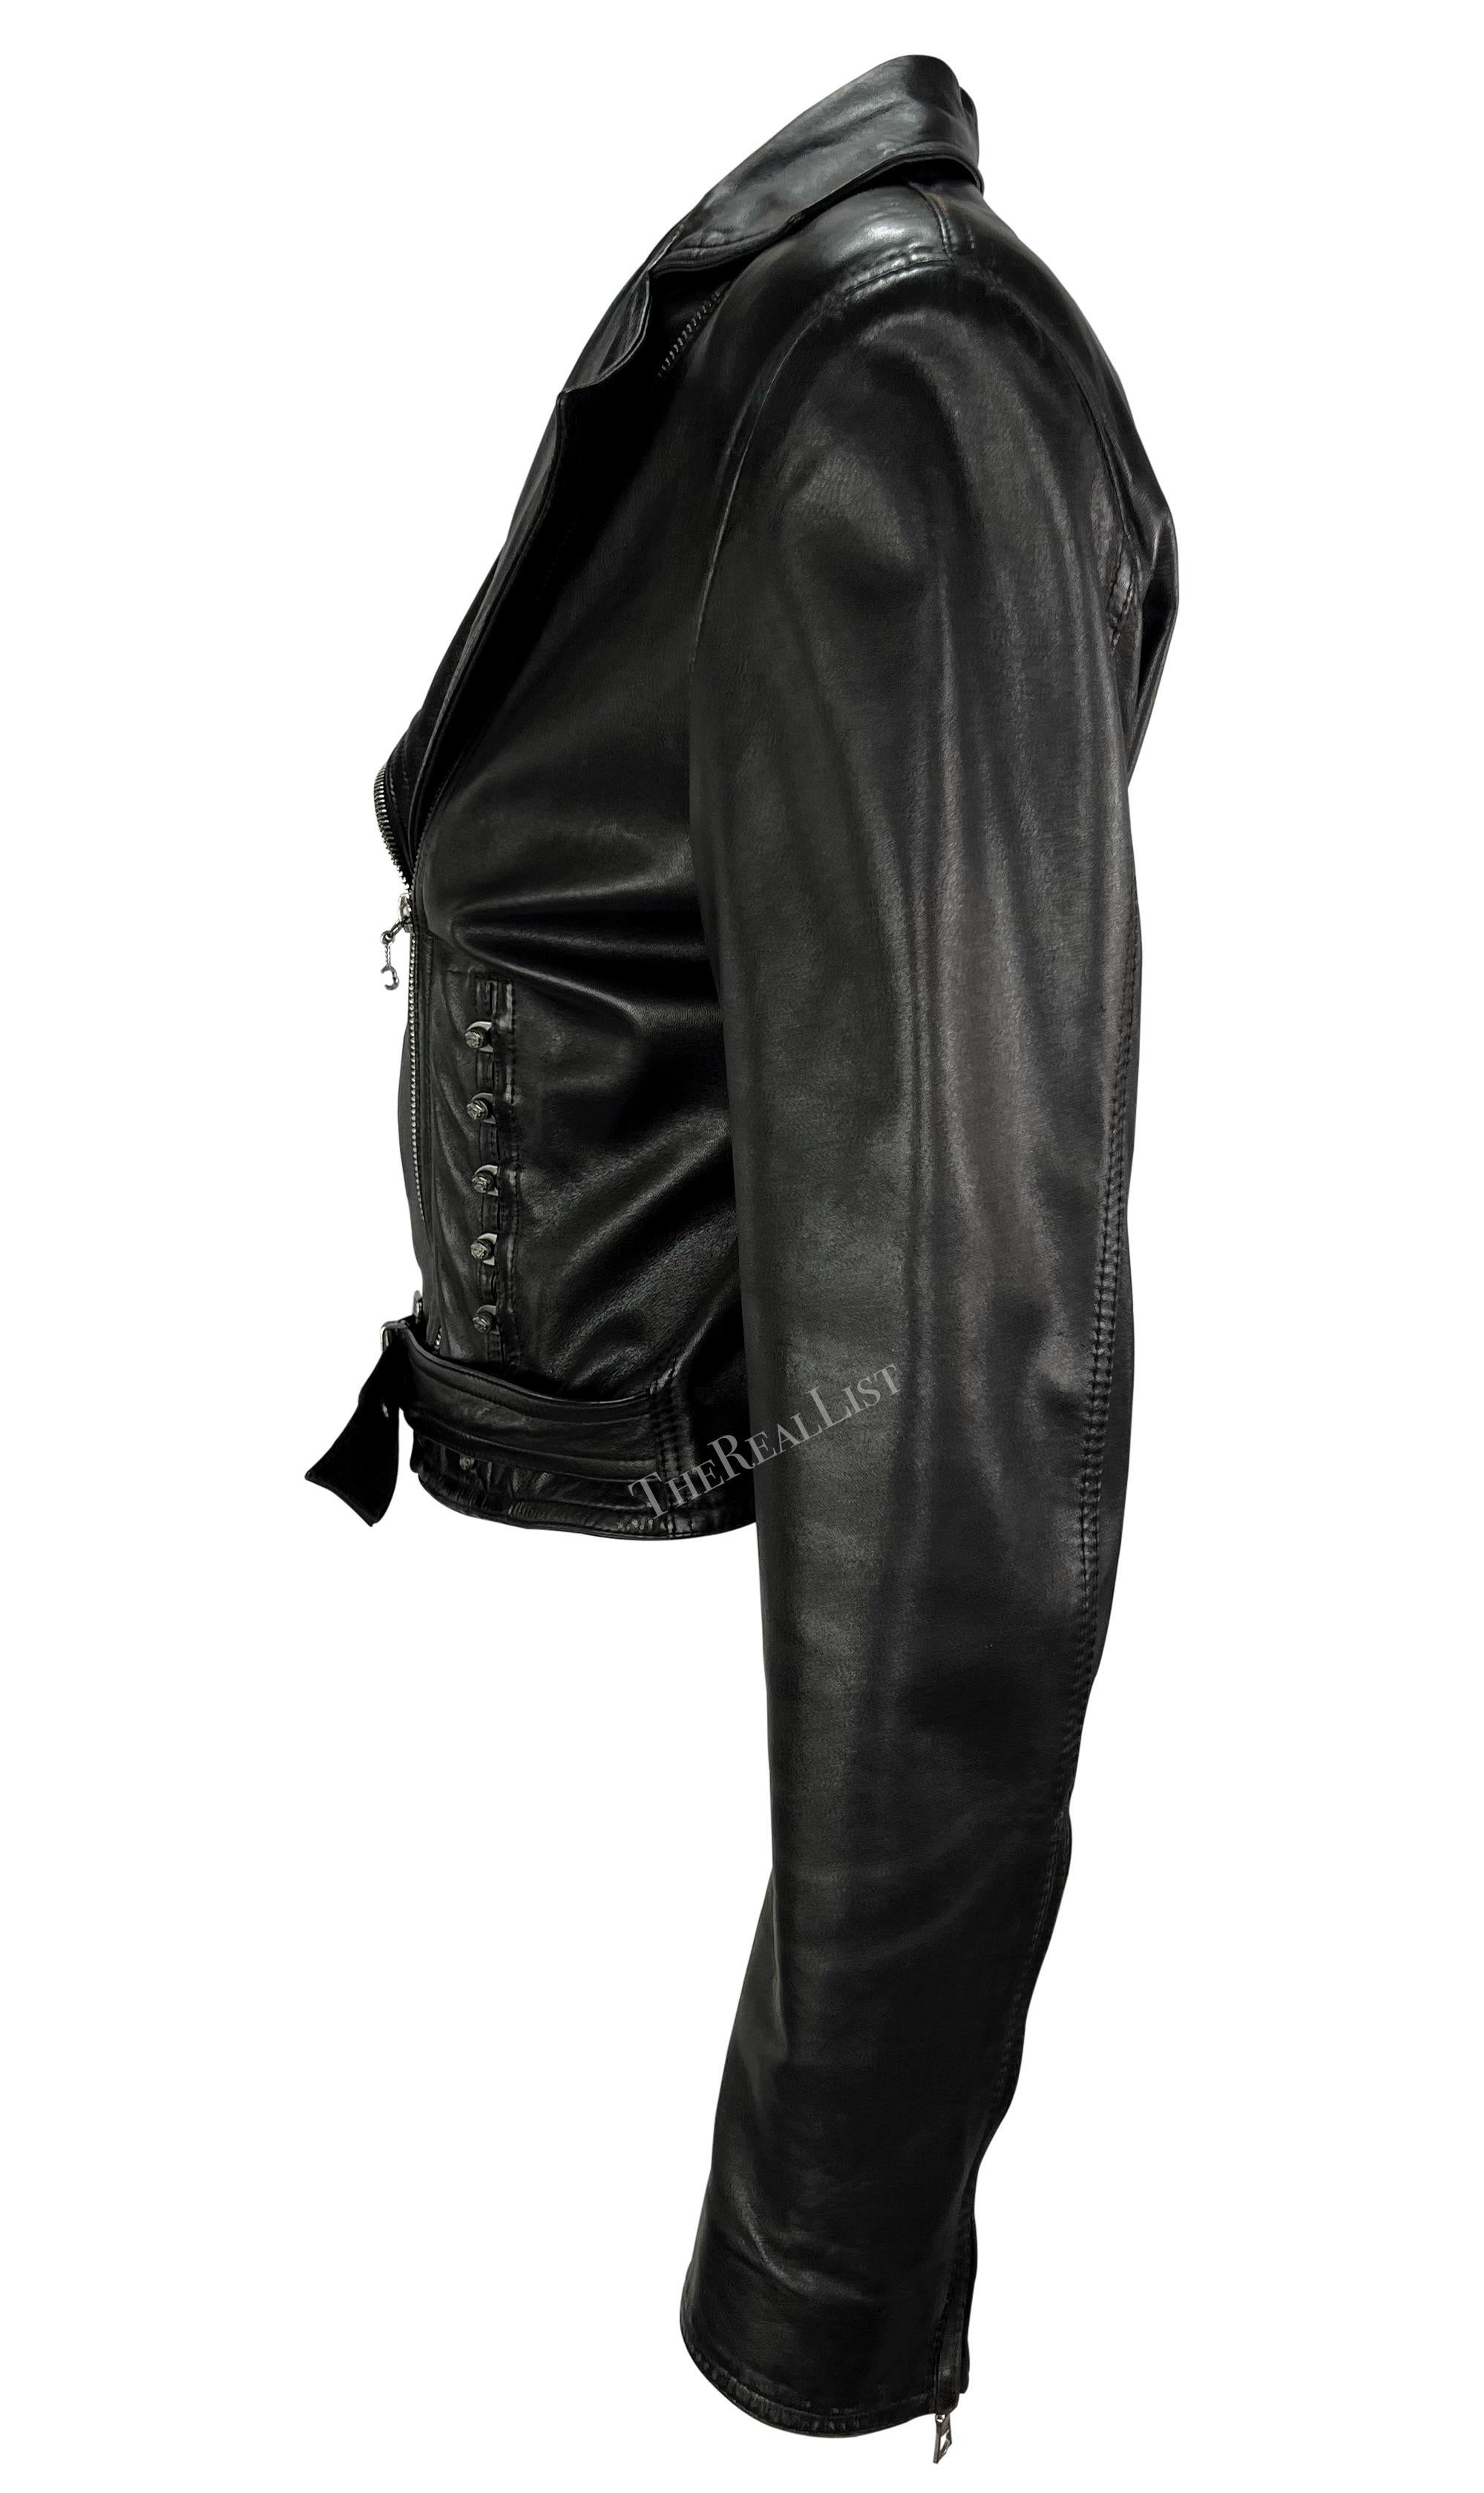 Women's S/S 1995 Gianni Versace Corsetry Style Black Leather Cropped Leather Jacket For Sale